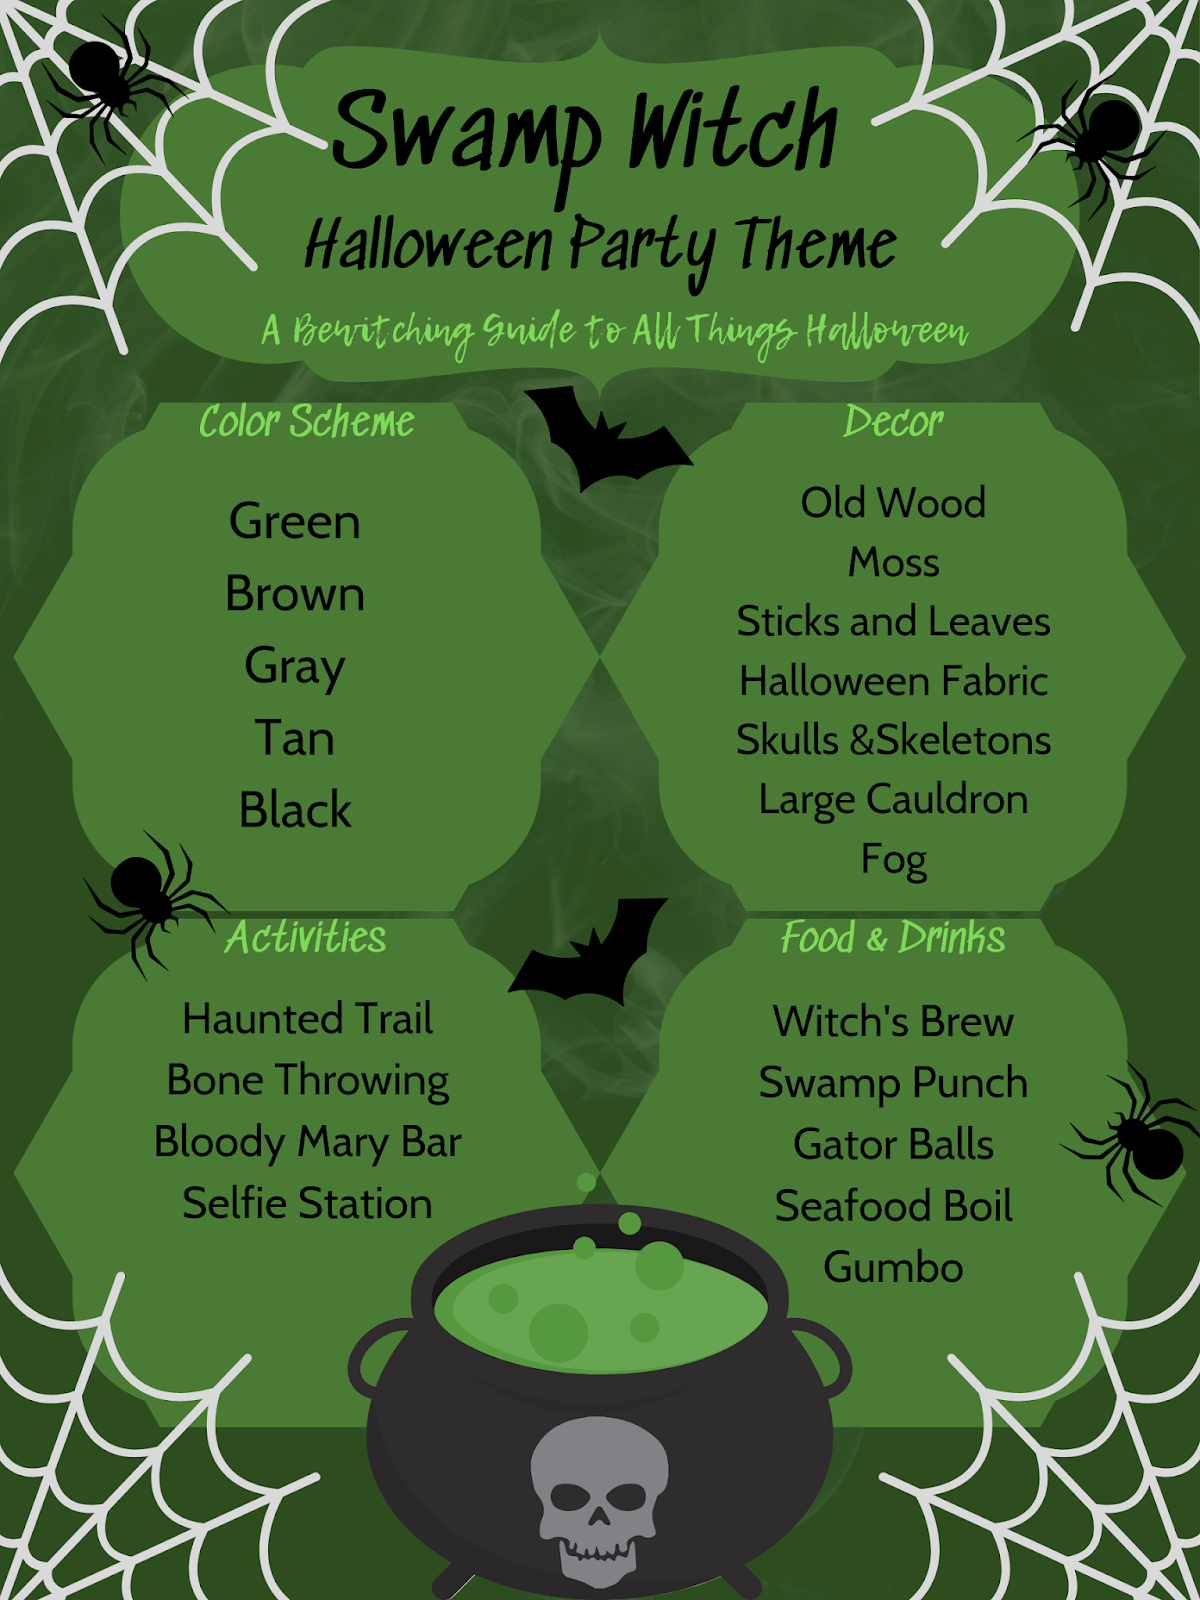 A Bewitching Guide to Halloween: Swamp Witch Halloween Party Theme